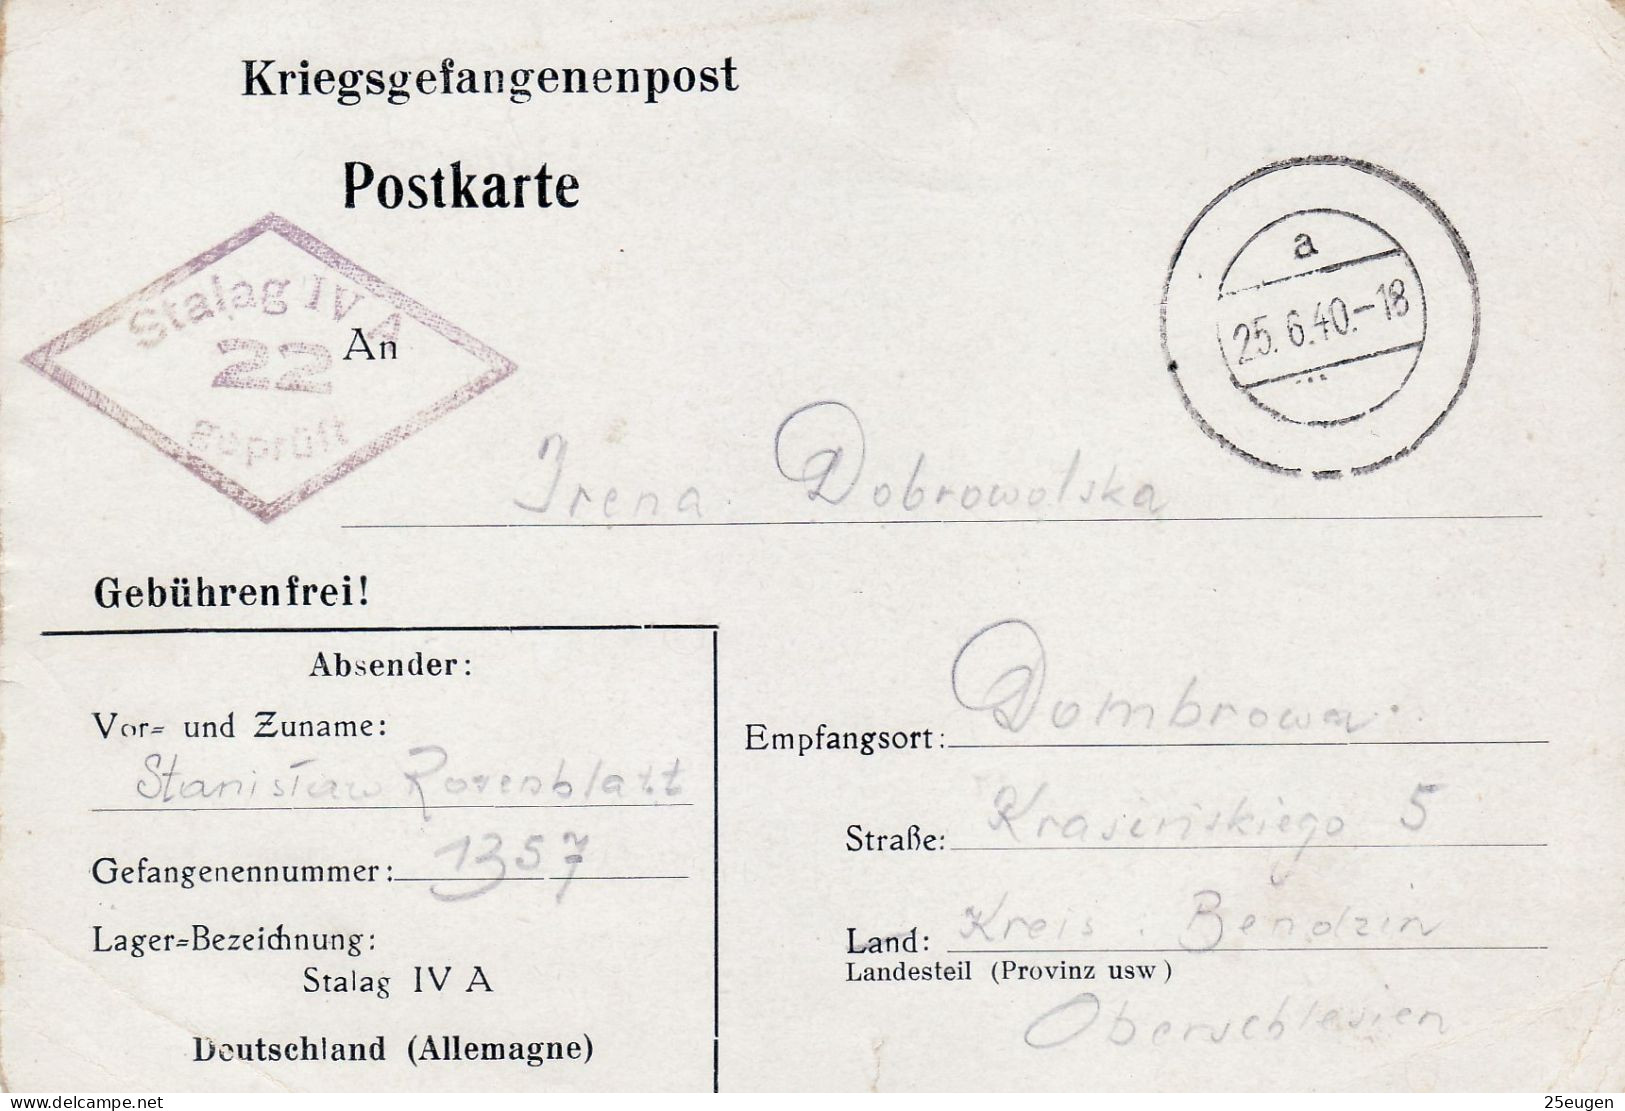 PRISONERS OF WAR MAIL 1940 POSTCARD SENT FROM STALAG IV A  TO DOMBROWA - Prisoner Camps